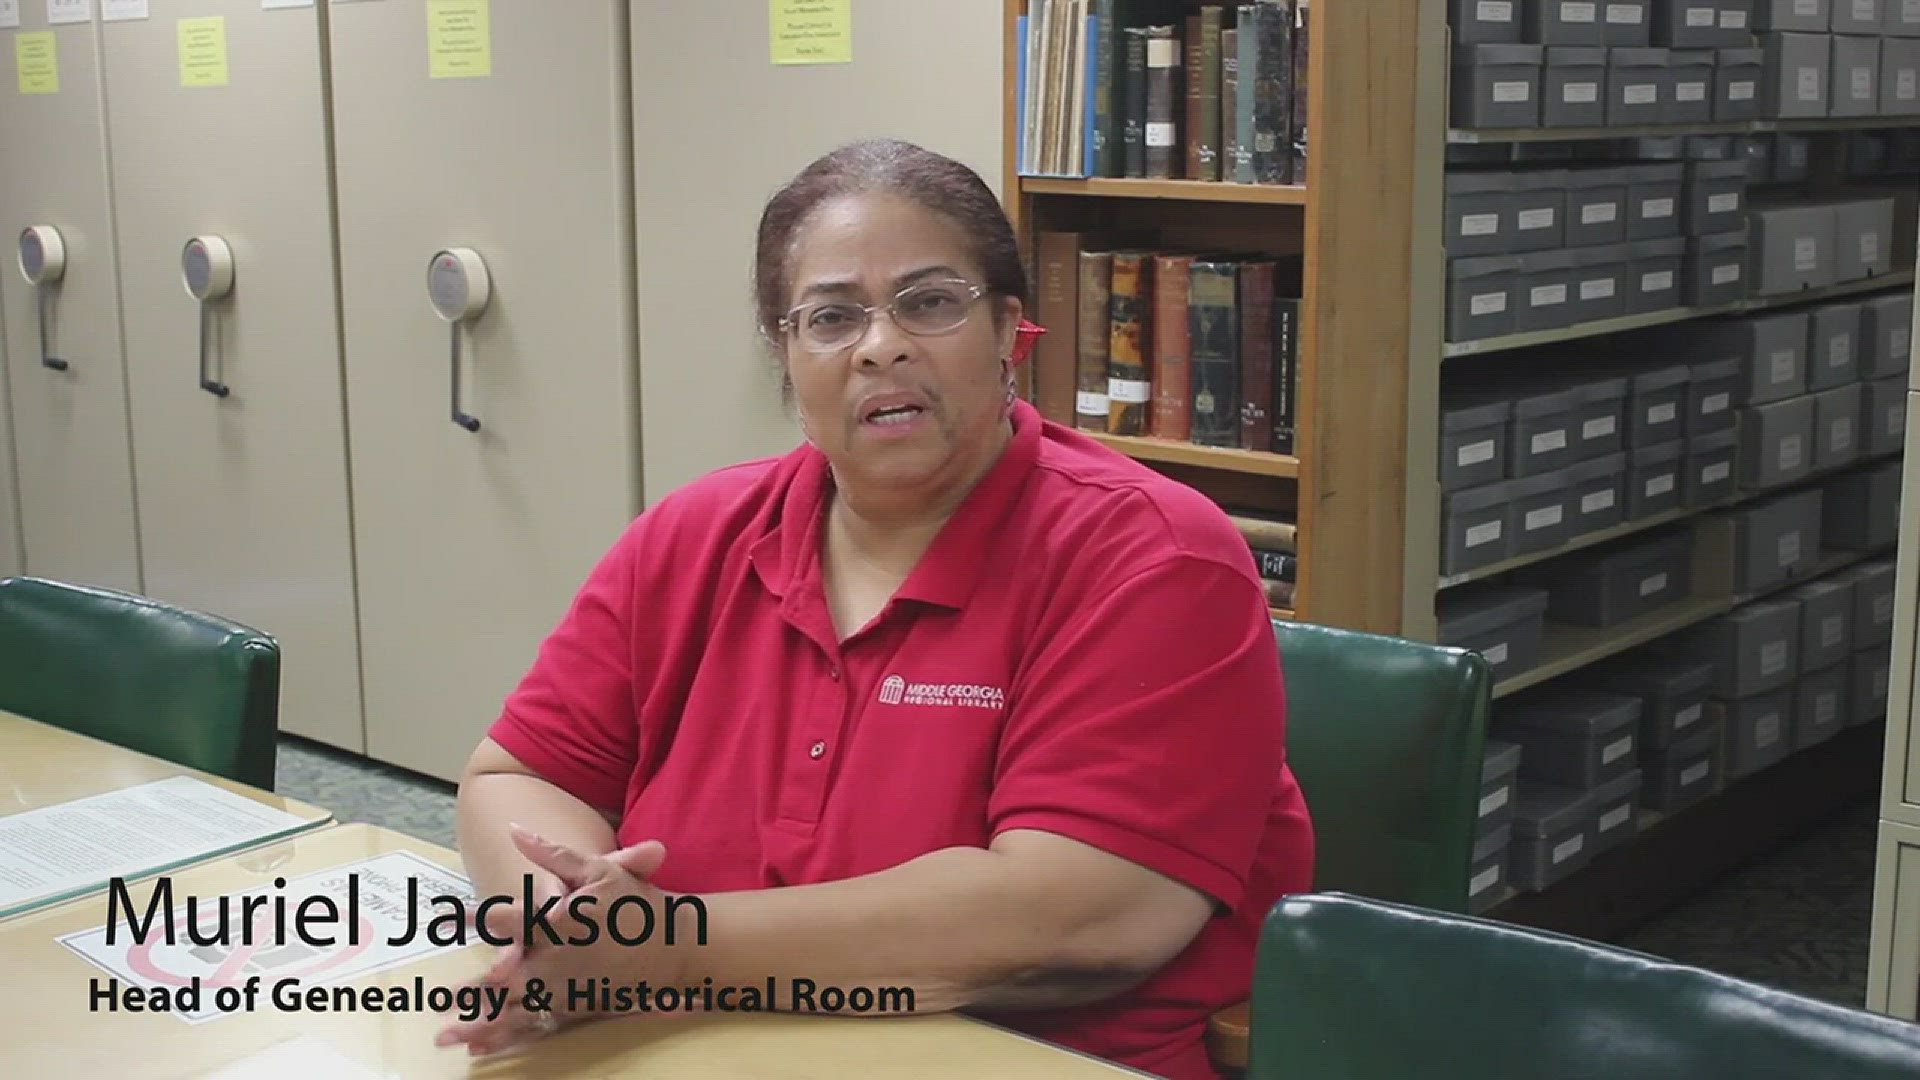 Just Curious: What is the genealogical and historical room at Washington Memorial Library and how do you use it?